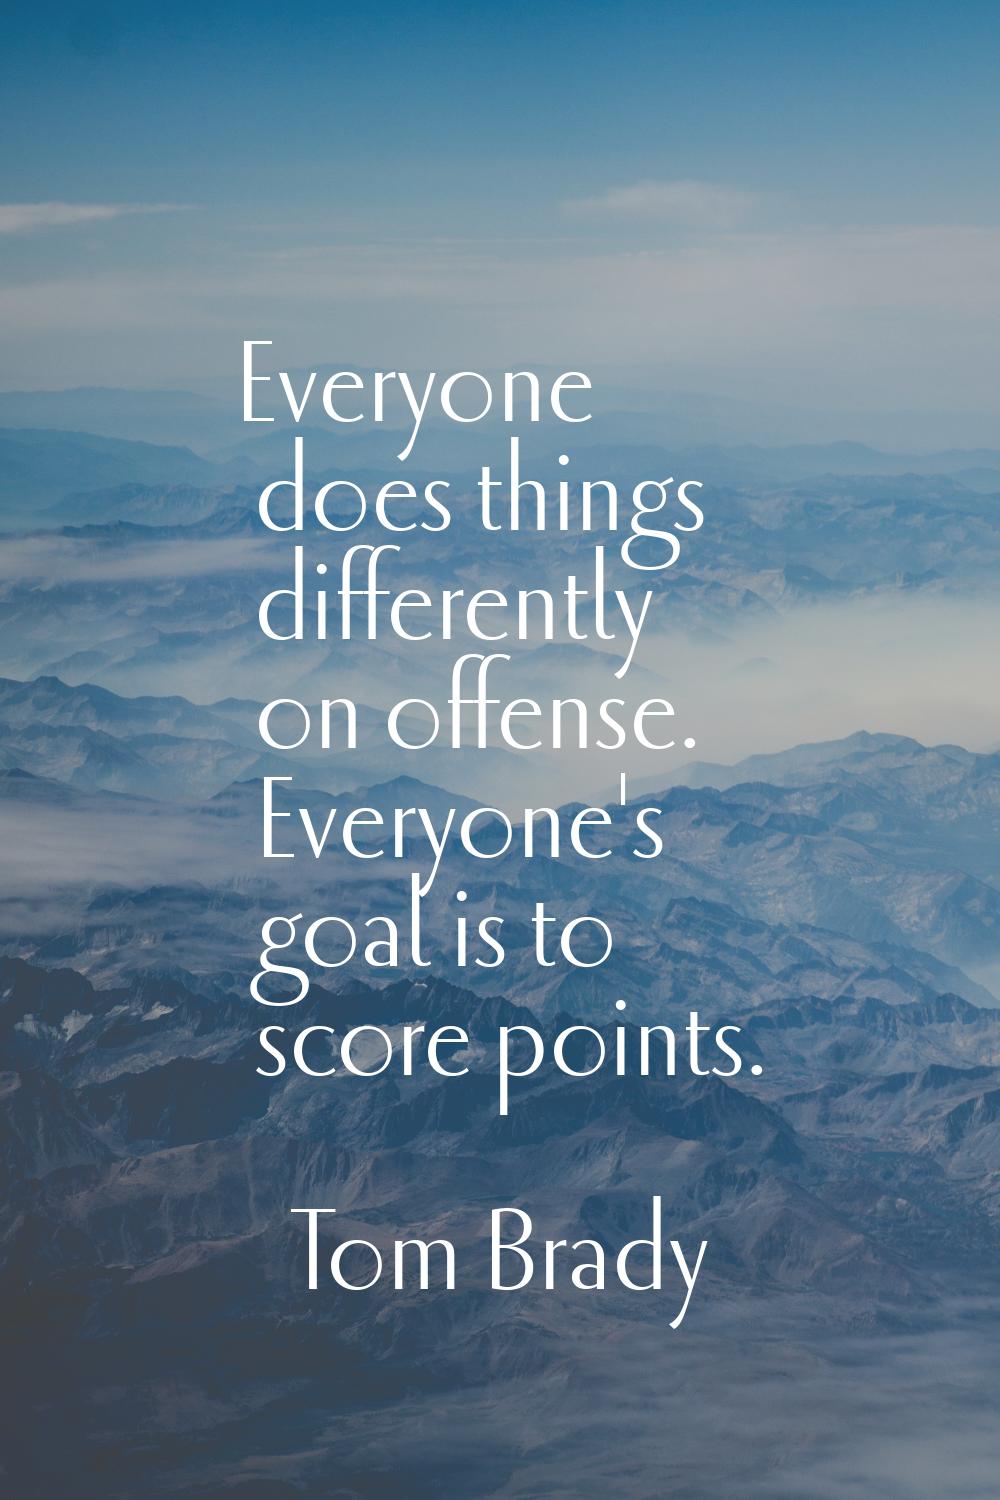 Everyone does things differently on offense. Everyone's goal is to score points.